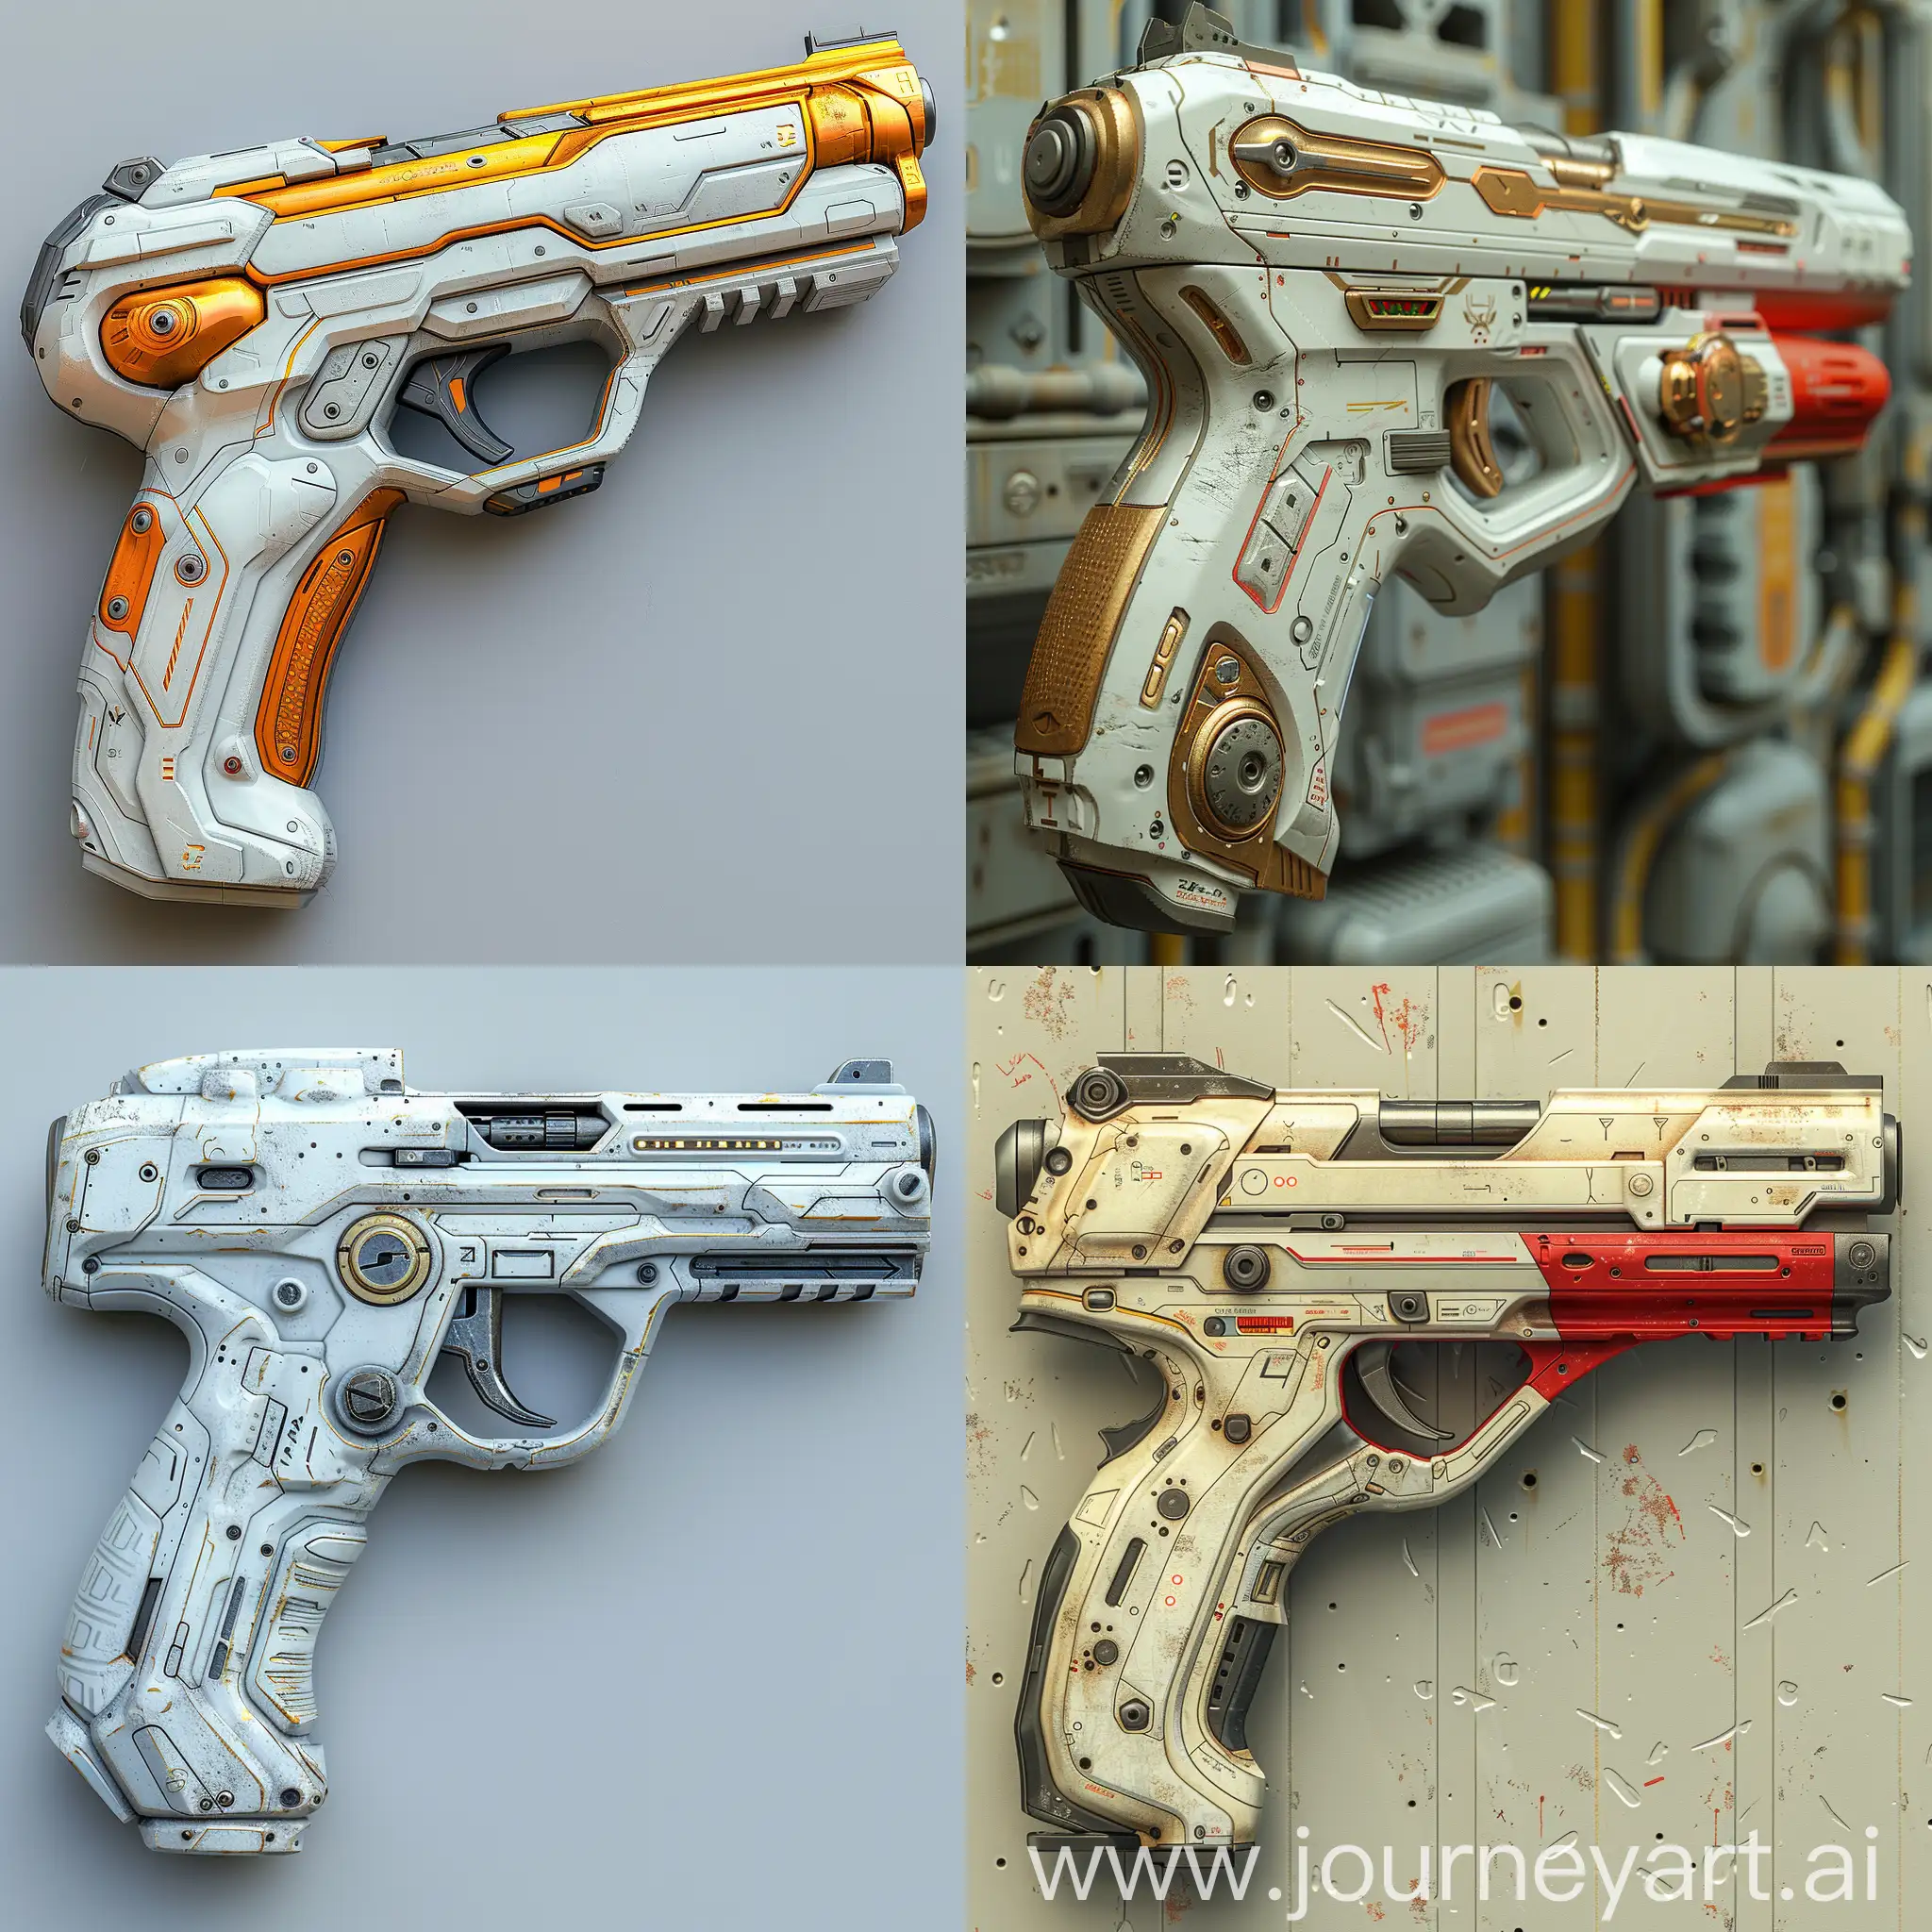 Futuristic pistol, energy weaponry, smart targeting and ballistics, modular design, biometric authentification and user safety, non-lethal options, octane render --stylize 1000